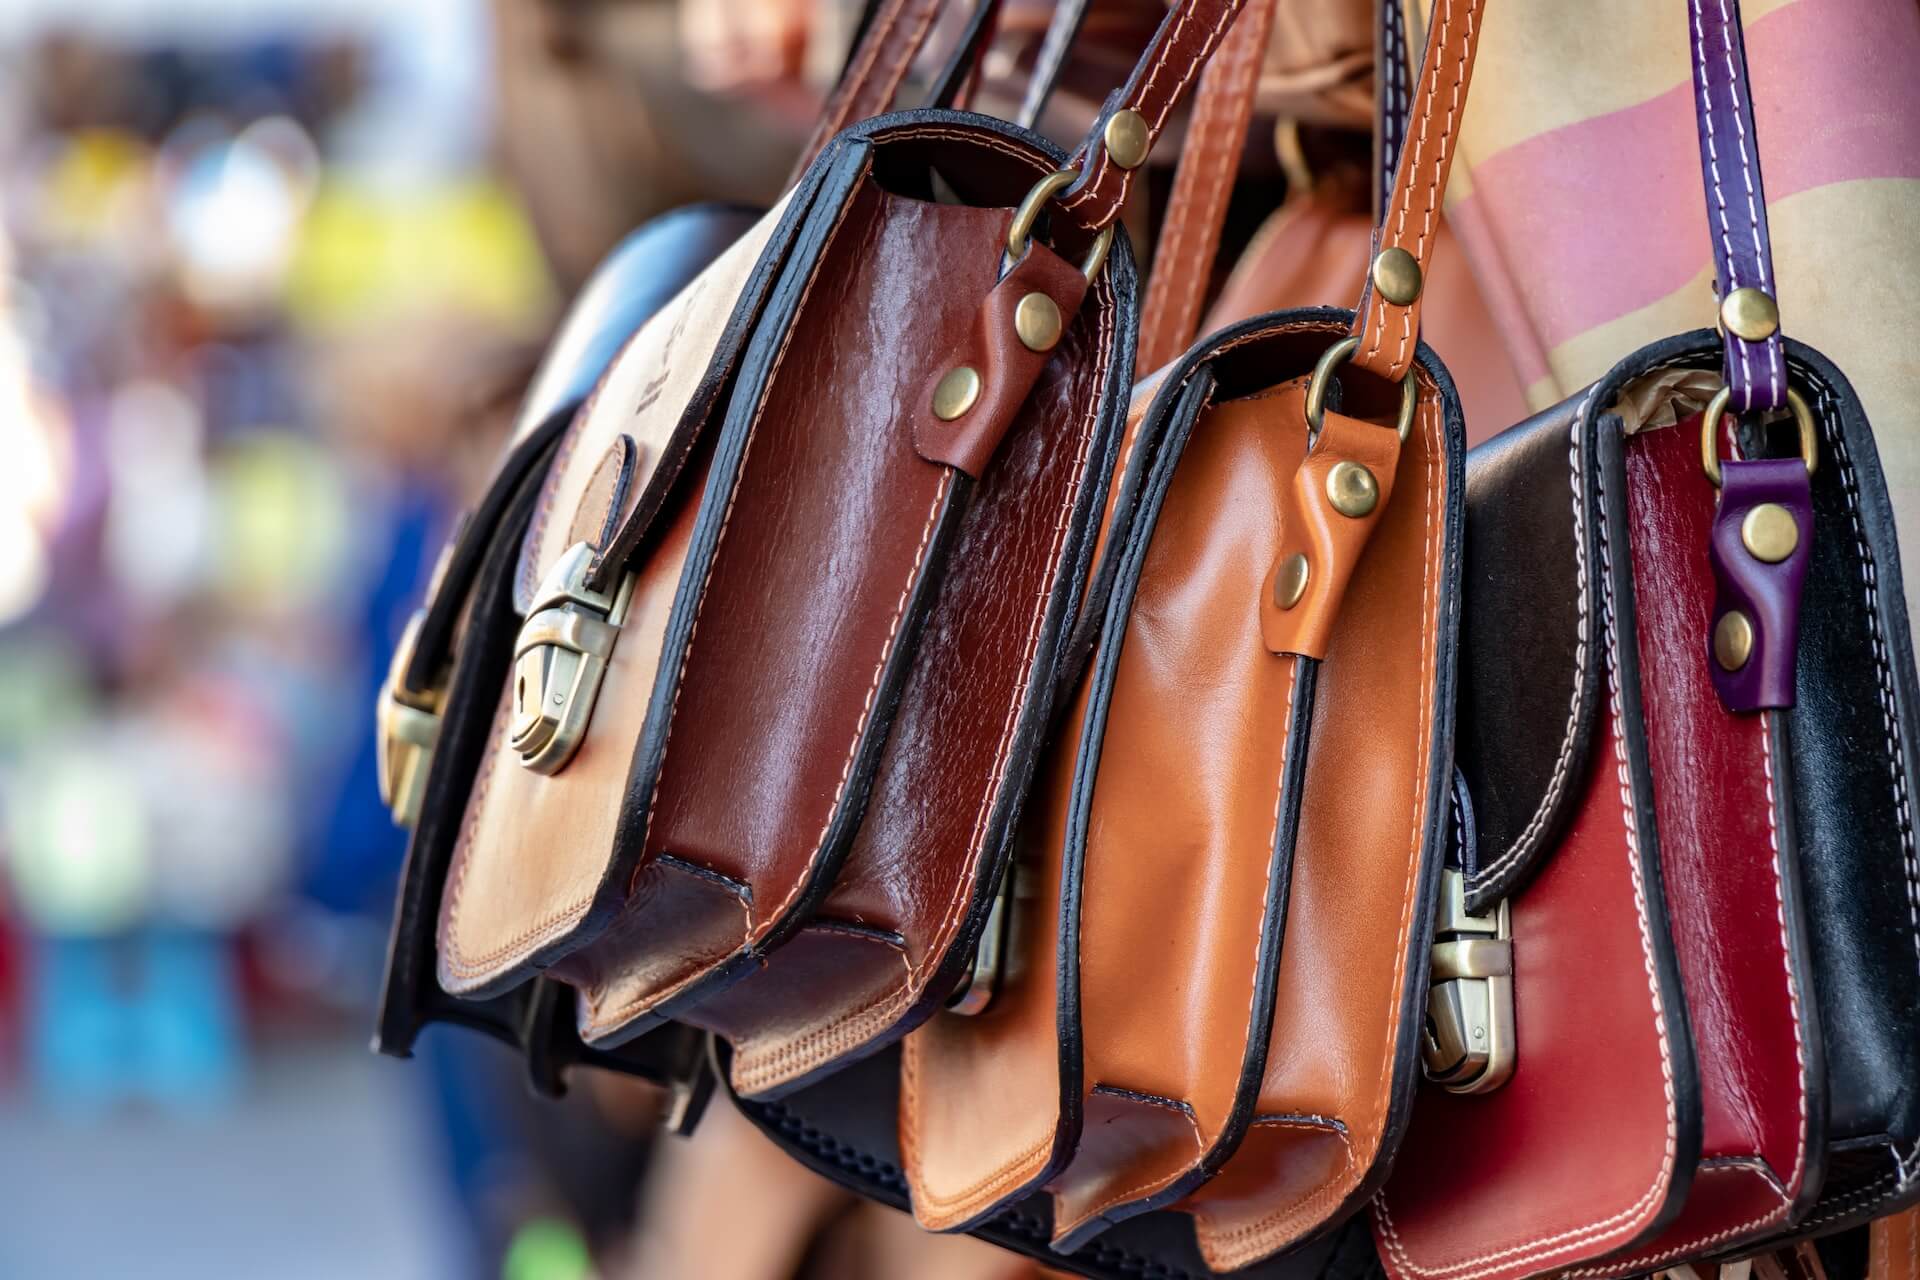 How to Sell Purses and Handbags Online | 9 Simple Steps